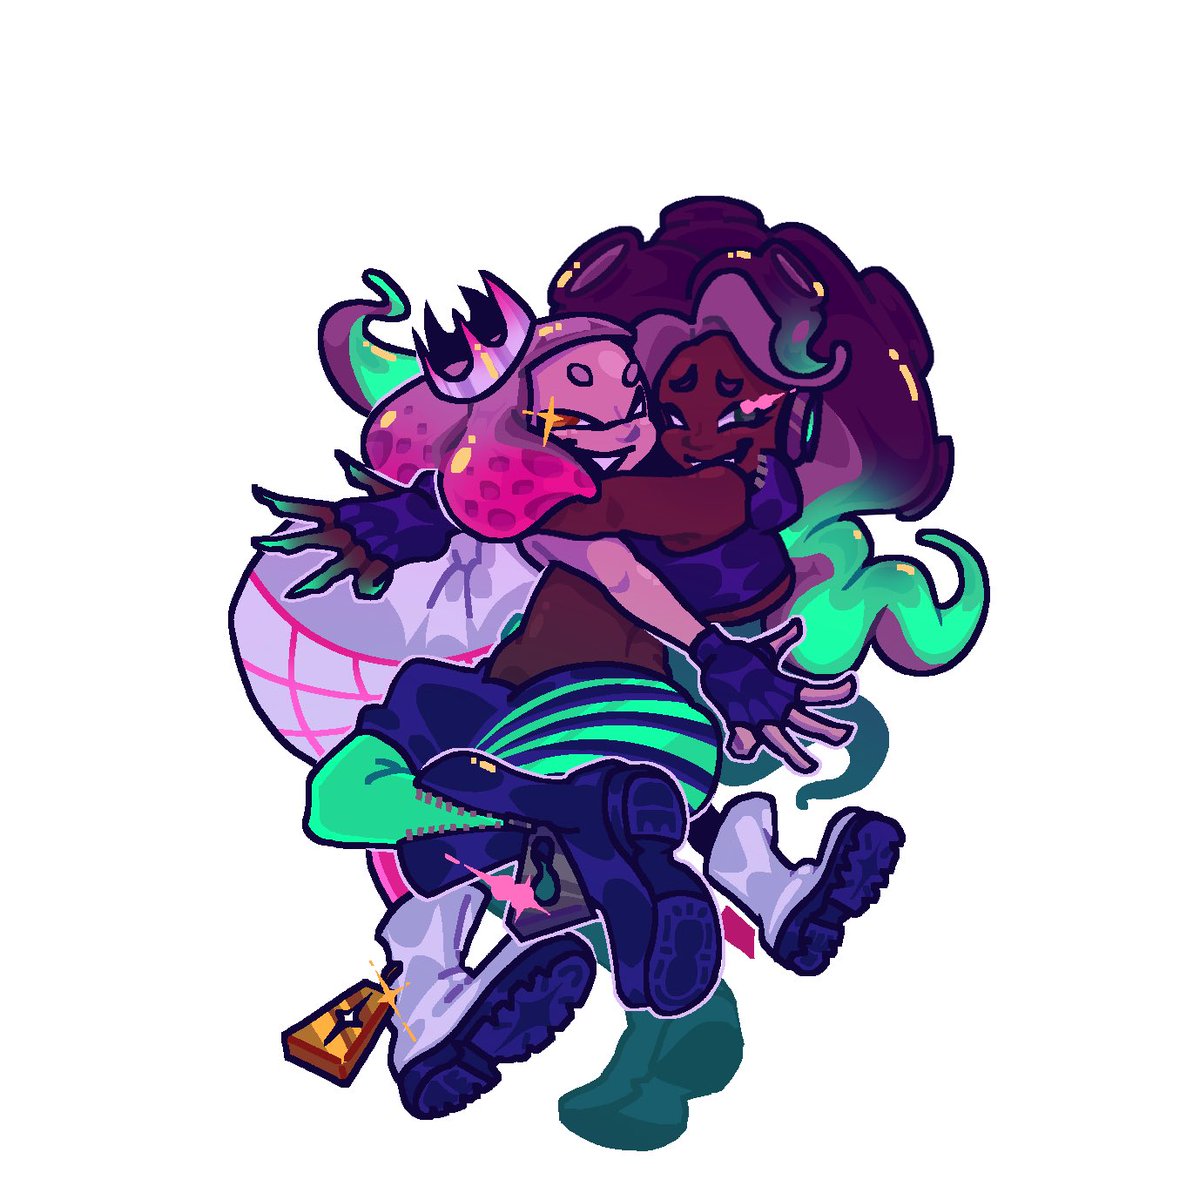 pearlina design that is being turned into marketable keychains!/could also be turned into stickers later 🫡